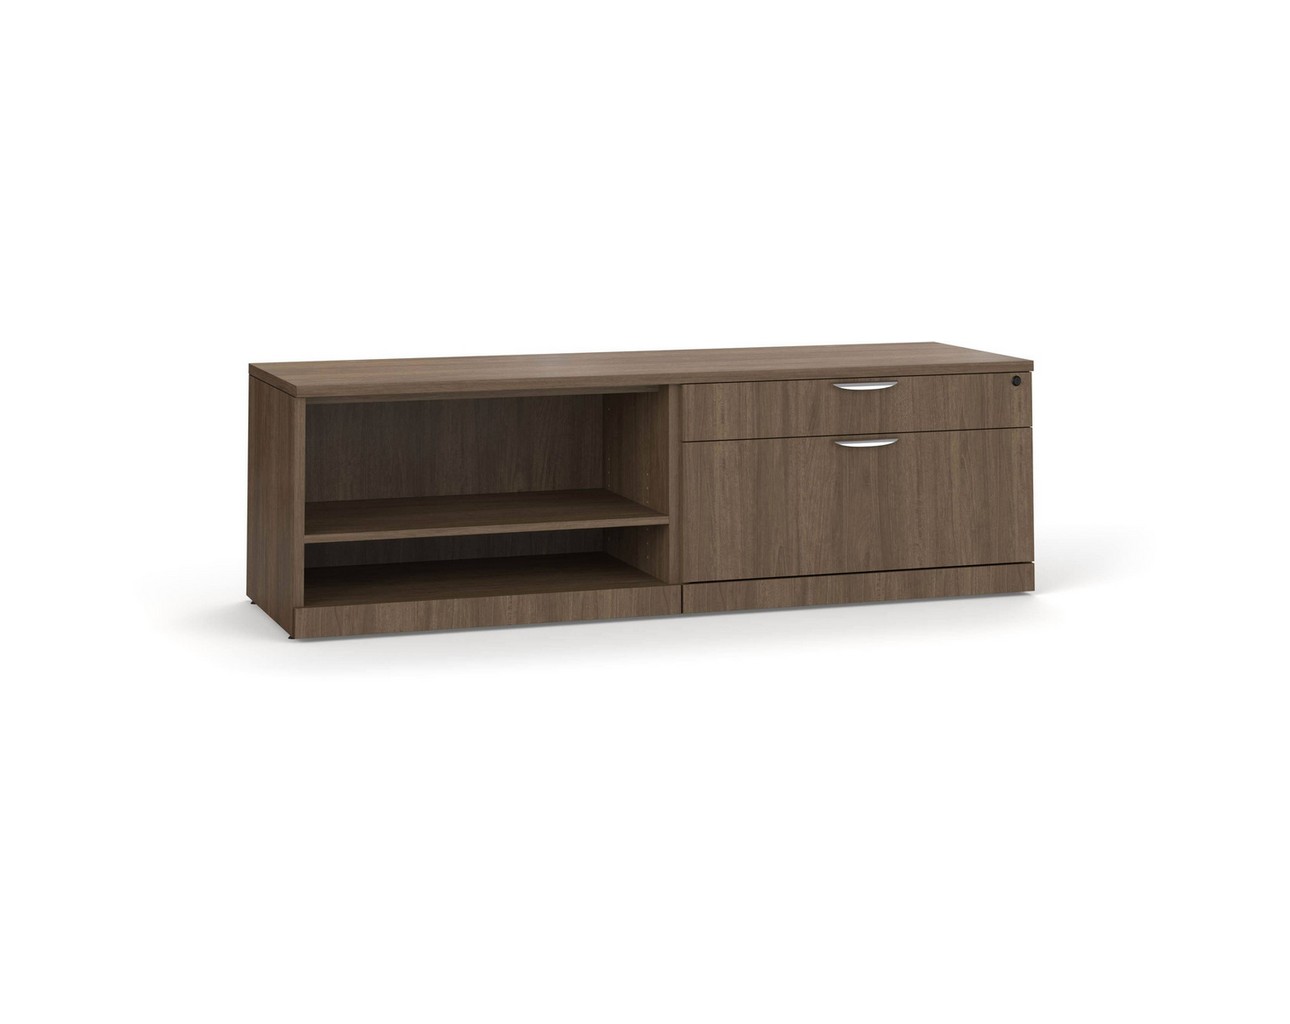 Elements Storage Cabinet and Bookshelf Credenza – MW Base and Top